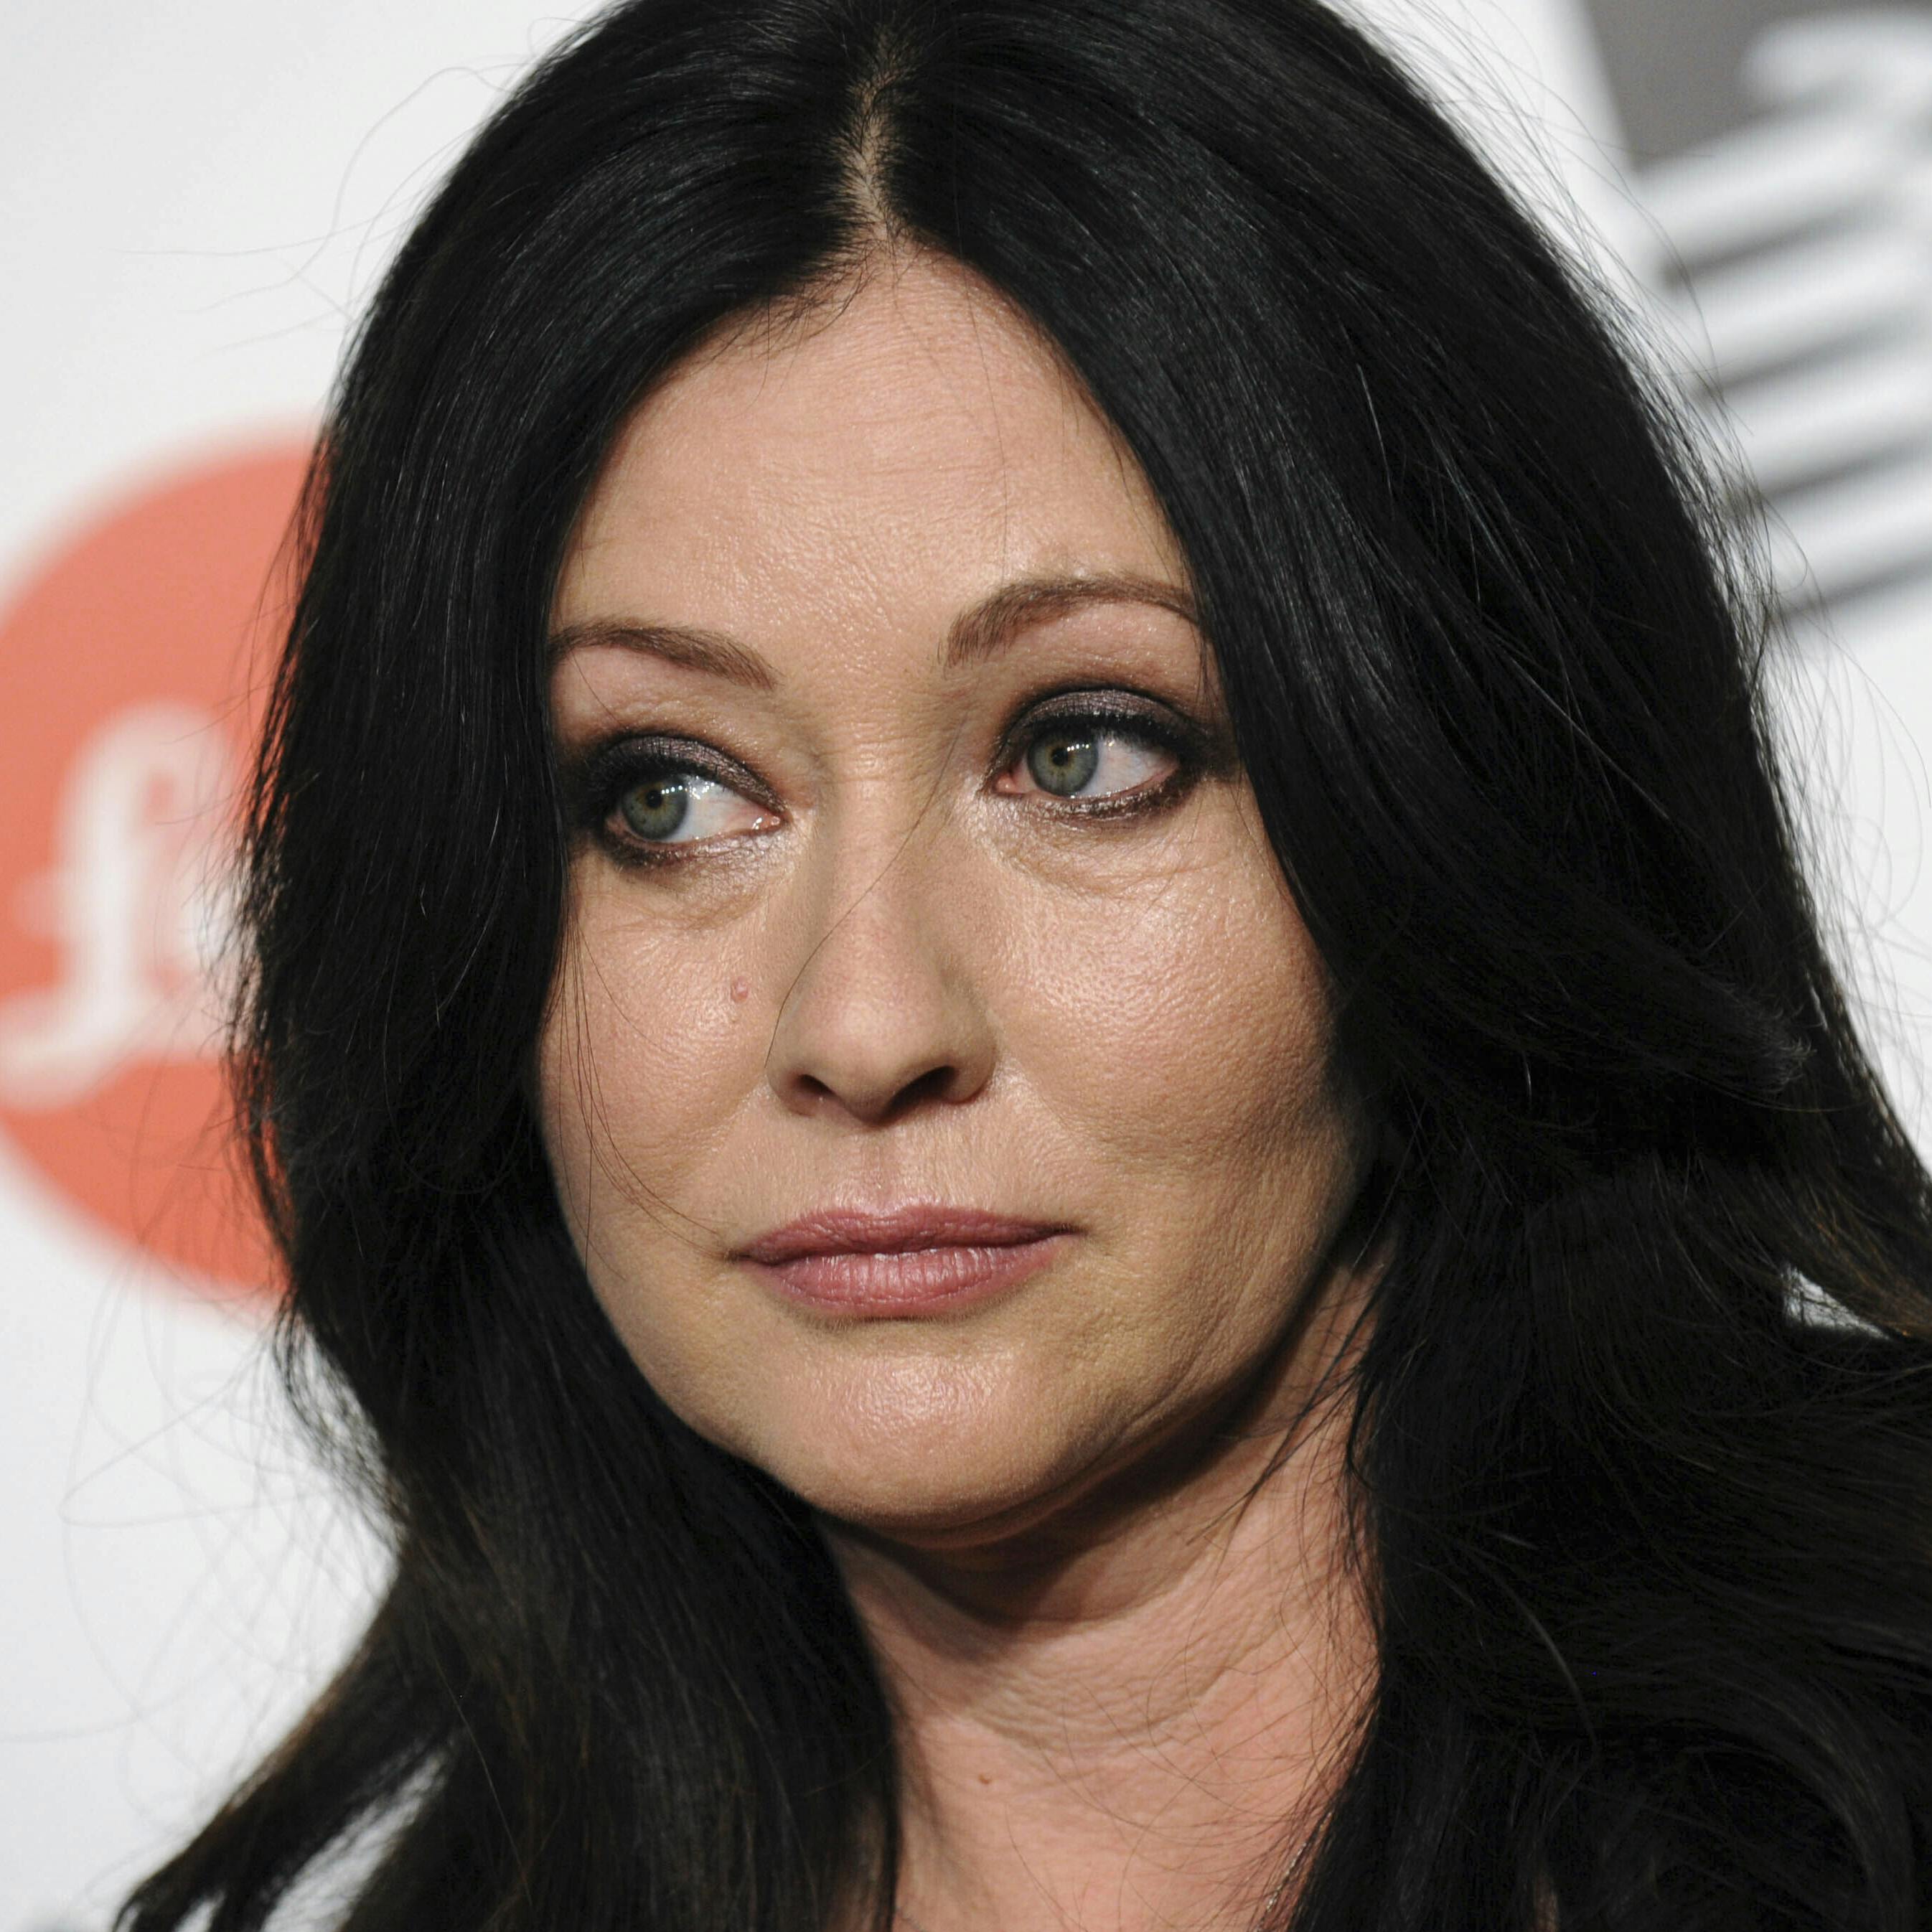 Photo by: Dennis Van Tine/STAR MAX/IPx 2020 2/4/20 Shannen Doherty reveals she has Stage 4 Cancer Diagnosis. STAR MAX File Photo: 5/19/14 Shannen Doherty at The 18th Annual Webby Awards. (NYC)